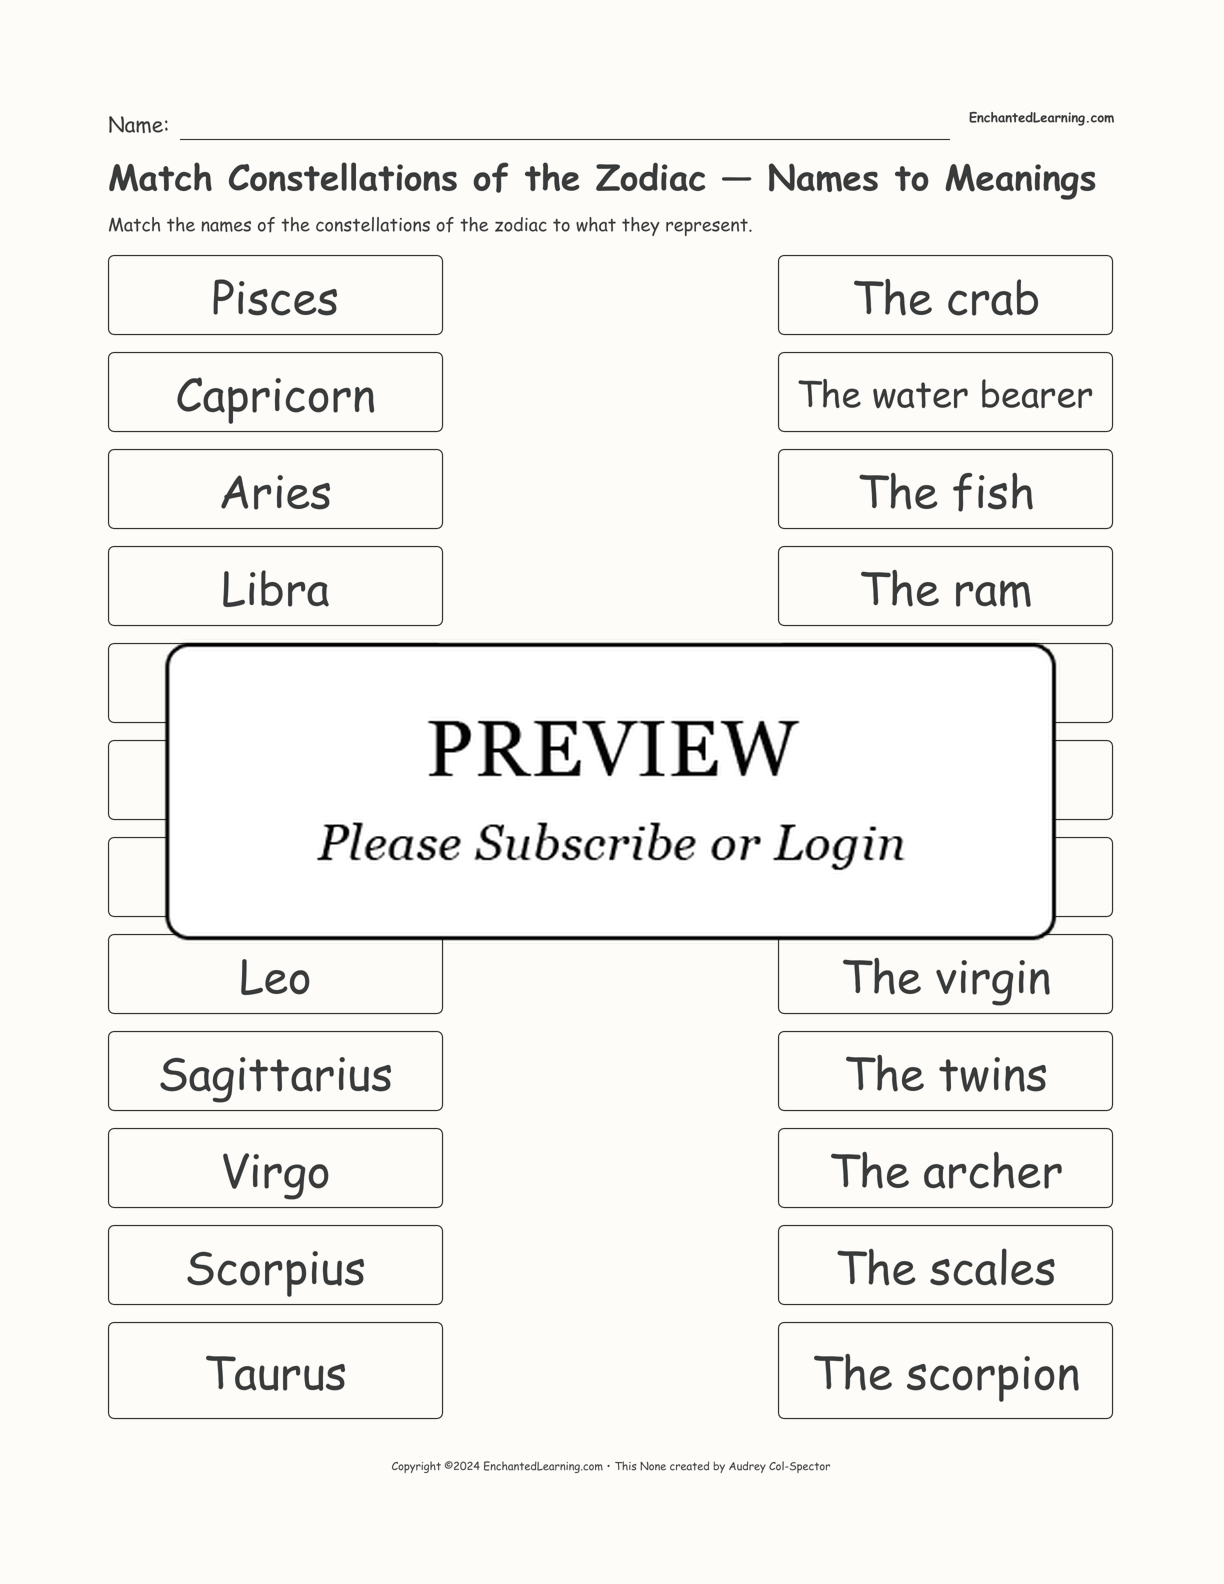 Match Constellations of the Zodiac — Names to Meanings interactive worksheet page 1